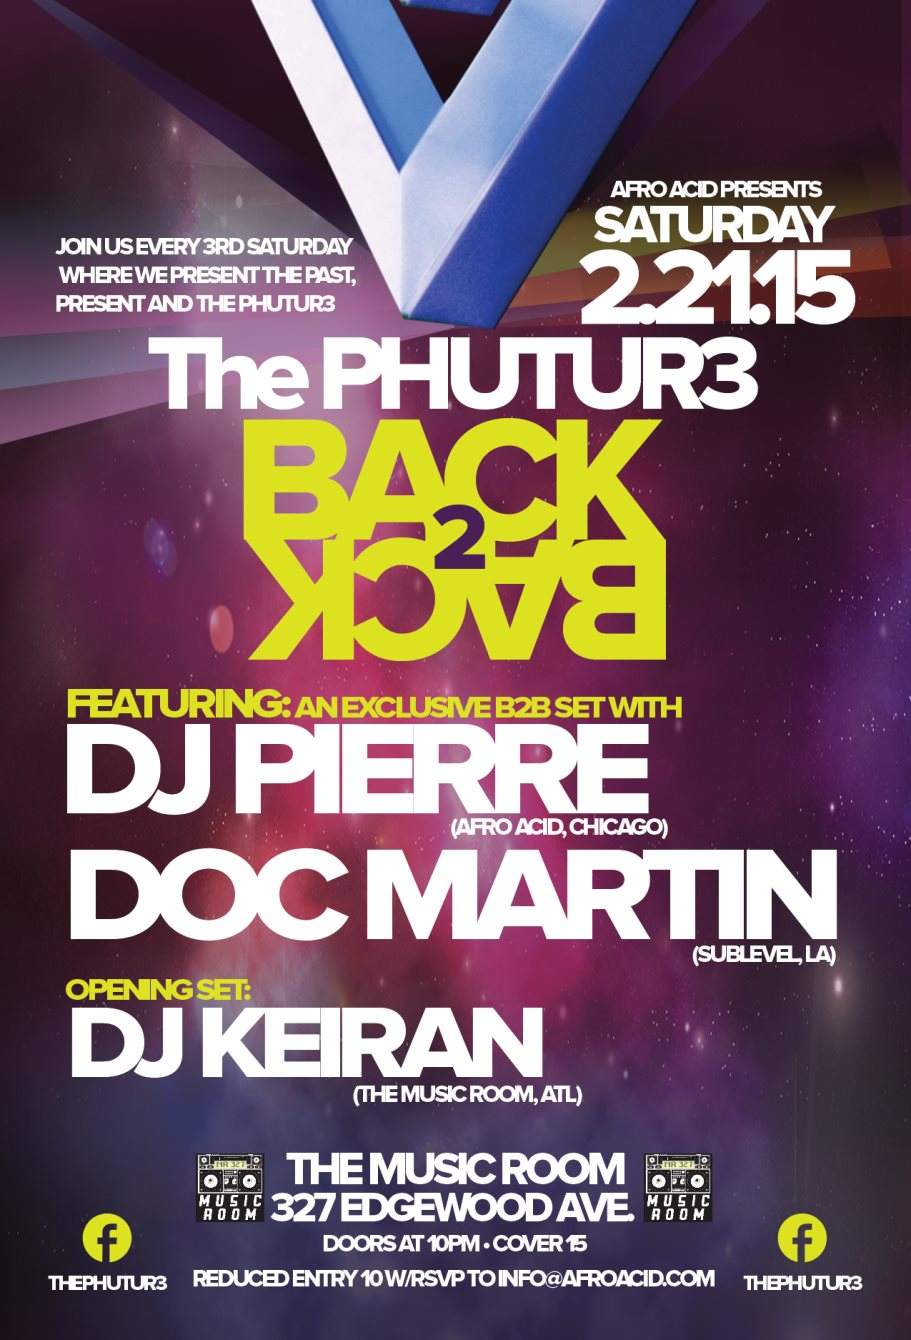 Afro Acid presents: The Phutur3 with DJ Pierre and DOC Martin - Página frontal